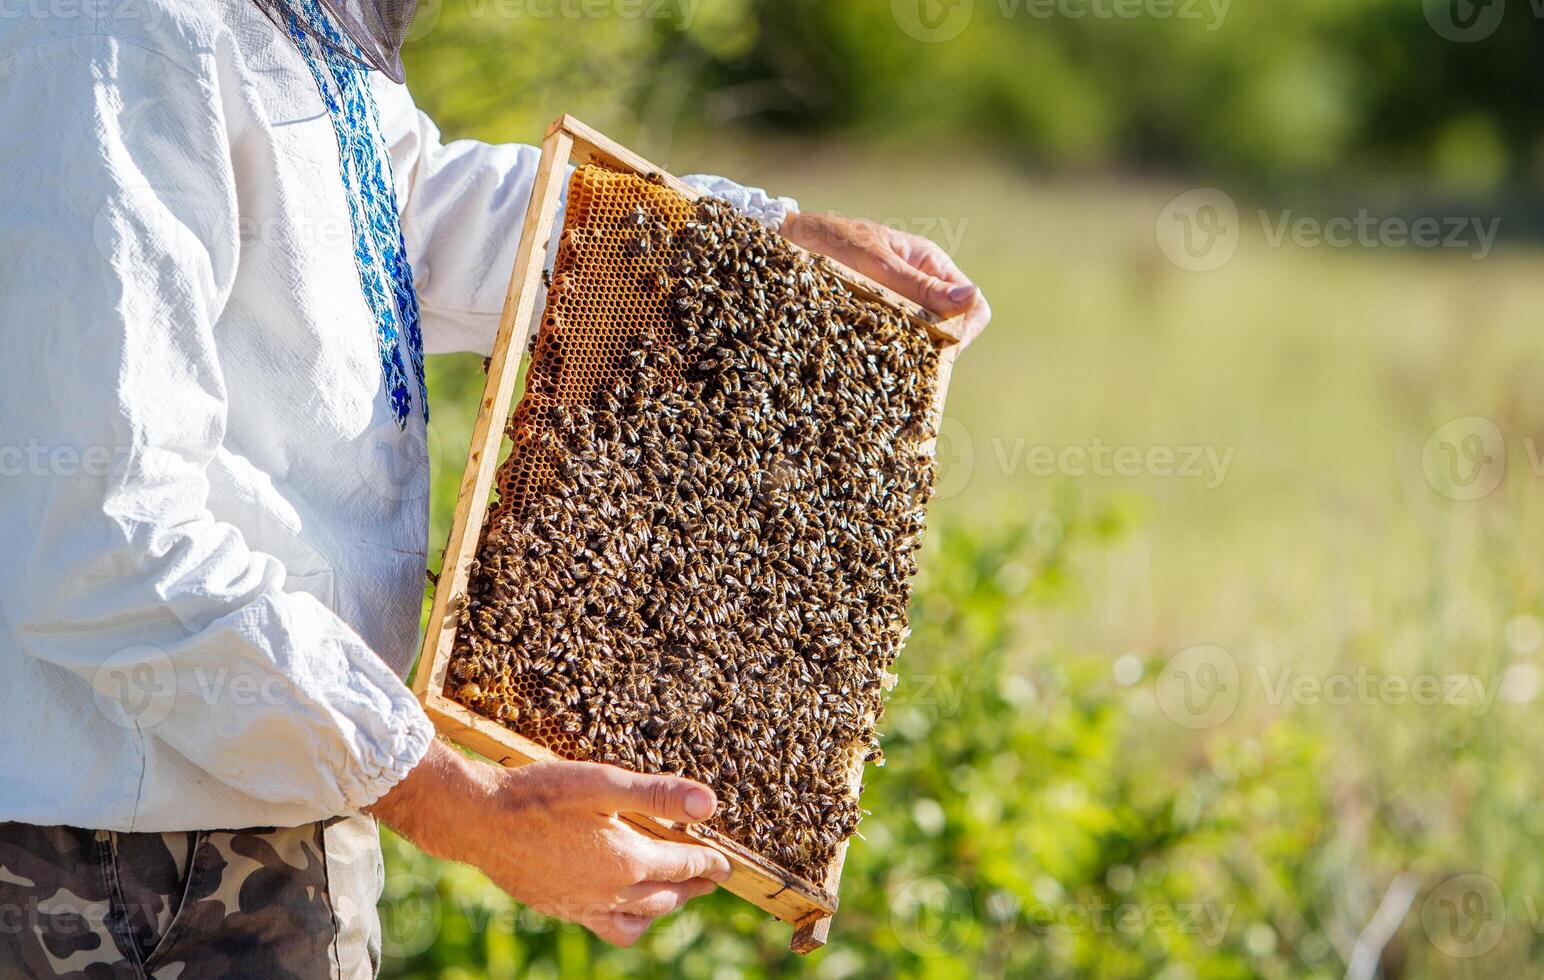 Beekeeper holds a frame with larvae of bees in his hands on the natural background. Man holding frame full of bees crawling on a honeycomb. Apiary concept photo